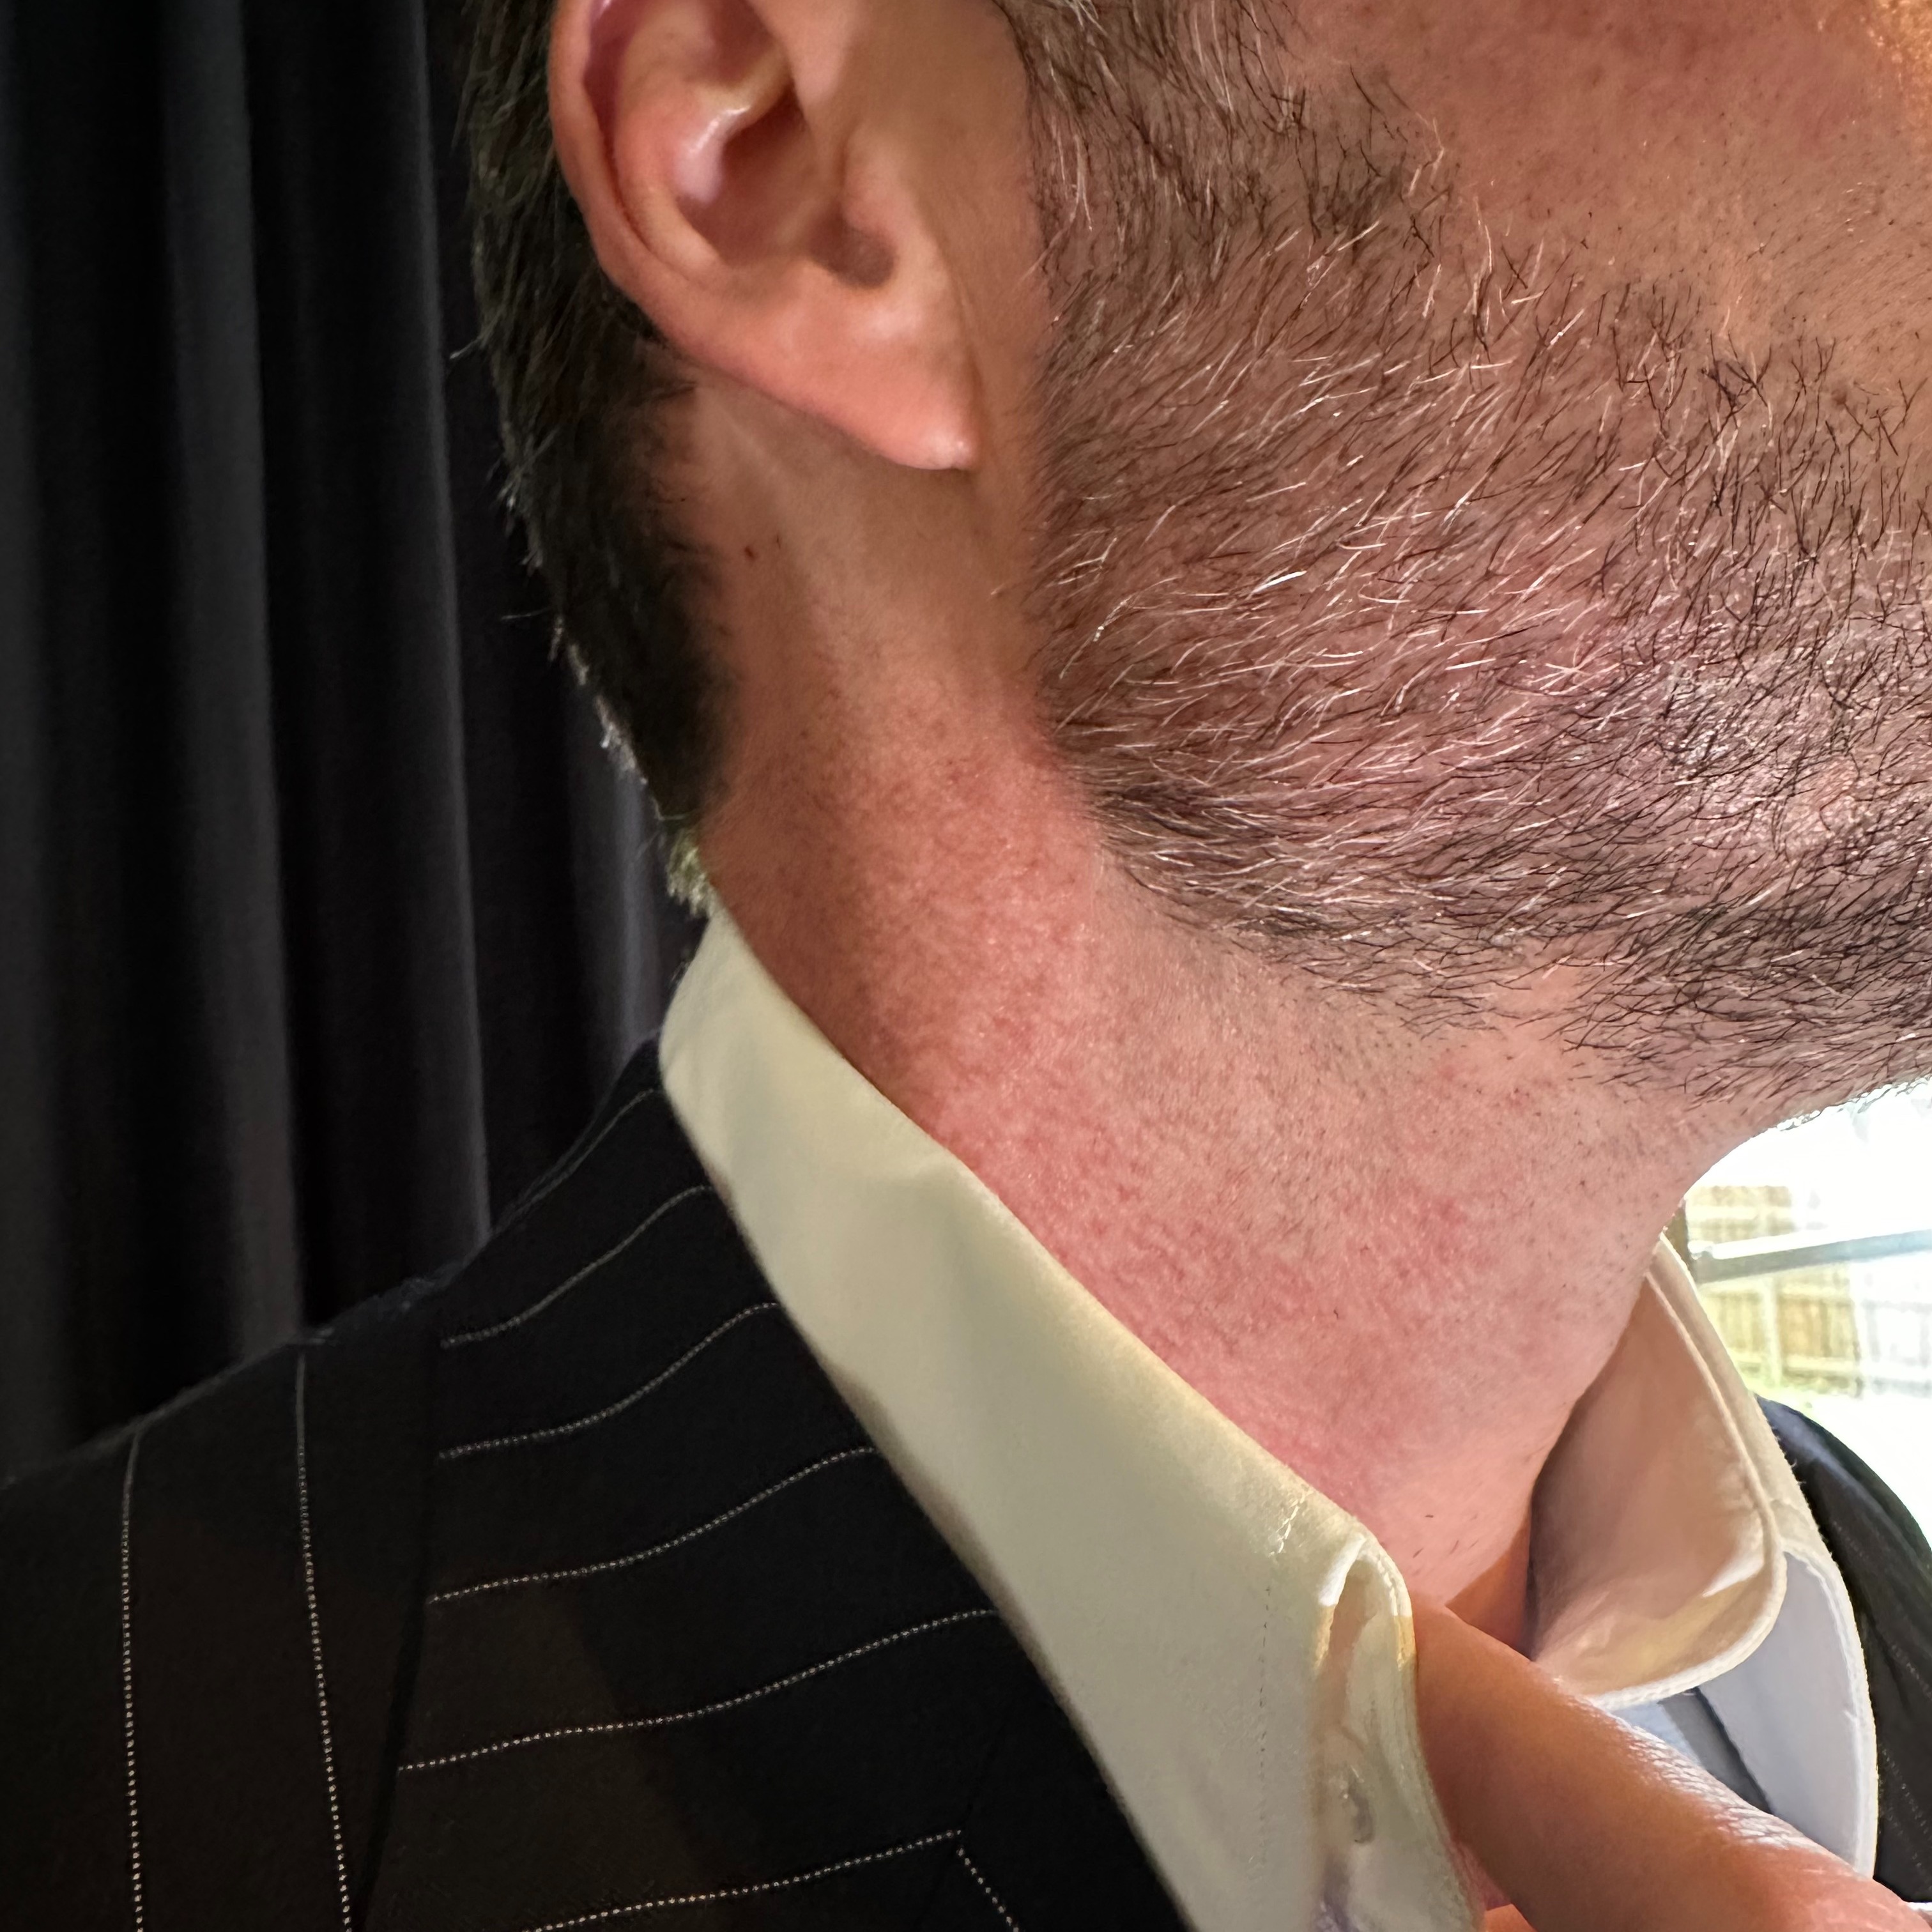 man's beard trim and shave line 